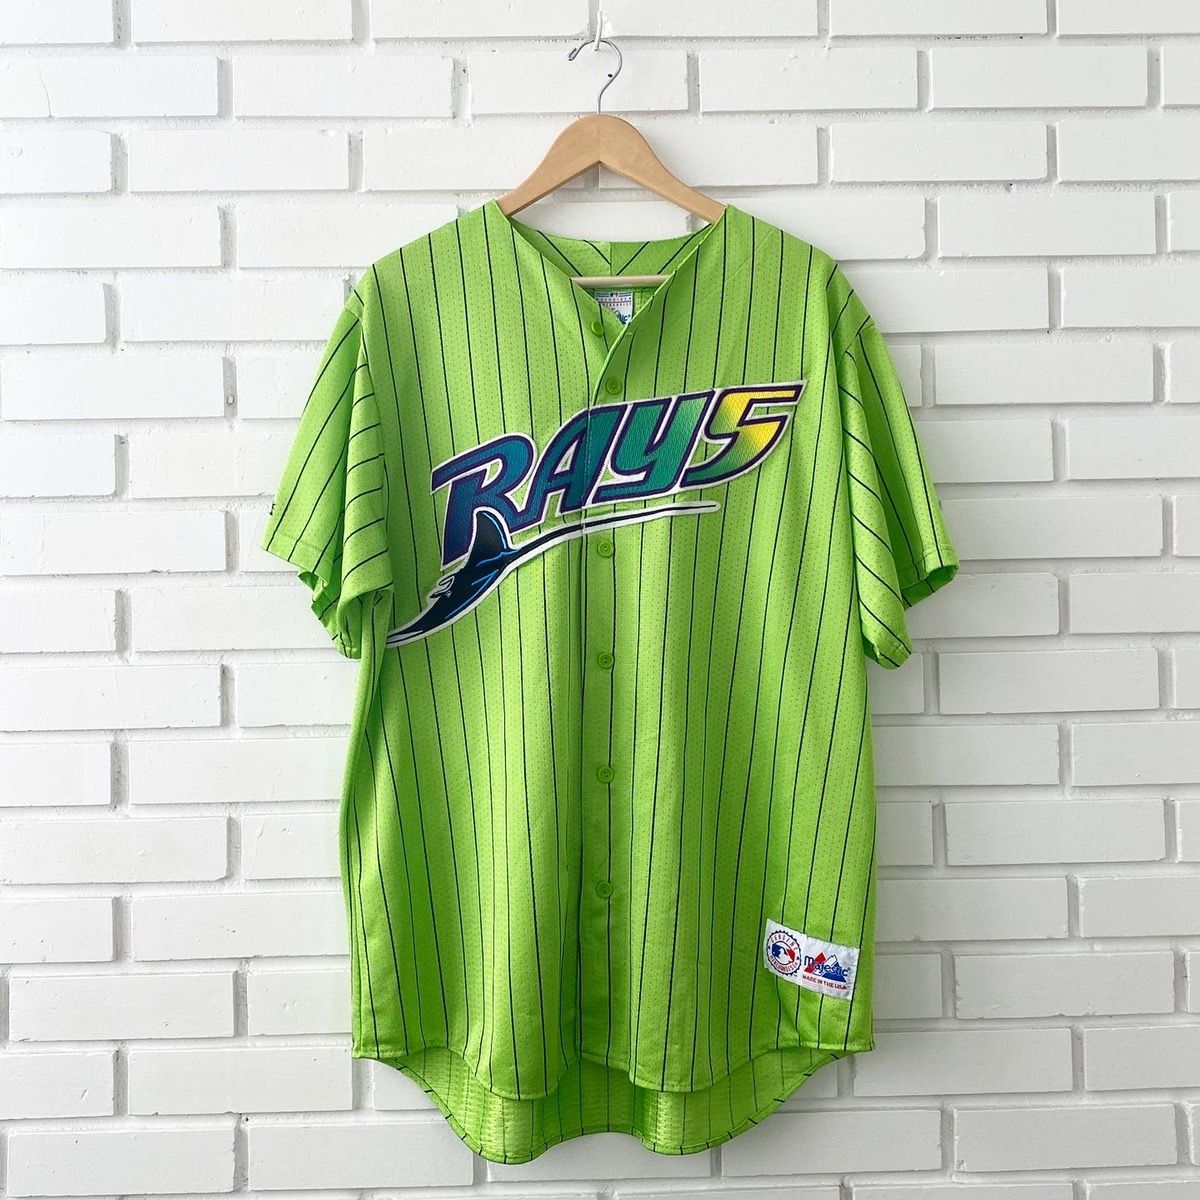 VTG RARE MADE IN USA MAJESTIC TAMPA BAY DEVIL RAYS NEON GREEN JERSEY SIZE XL